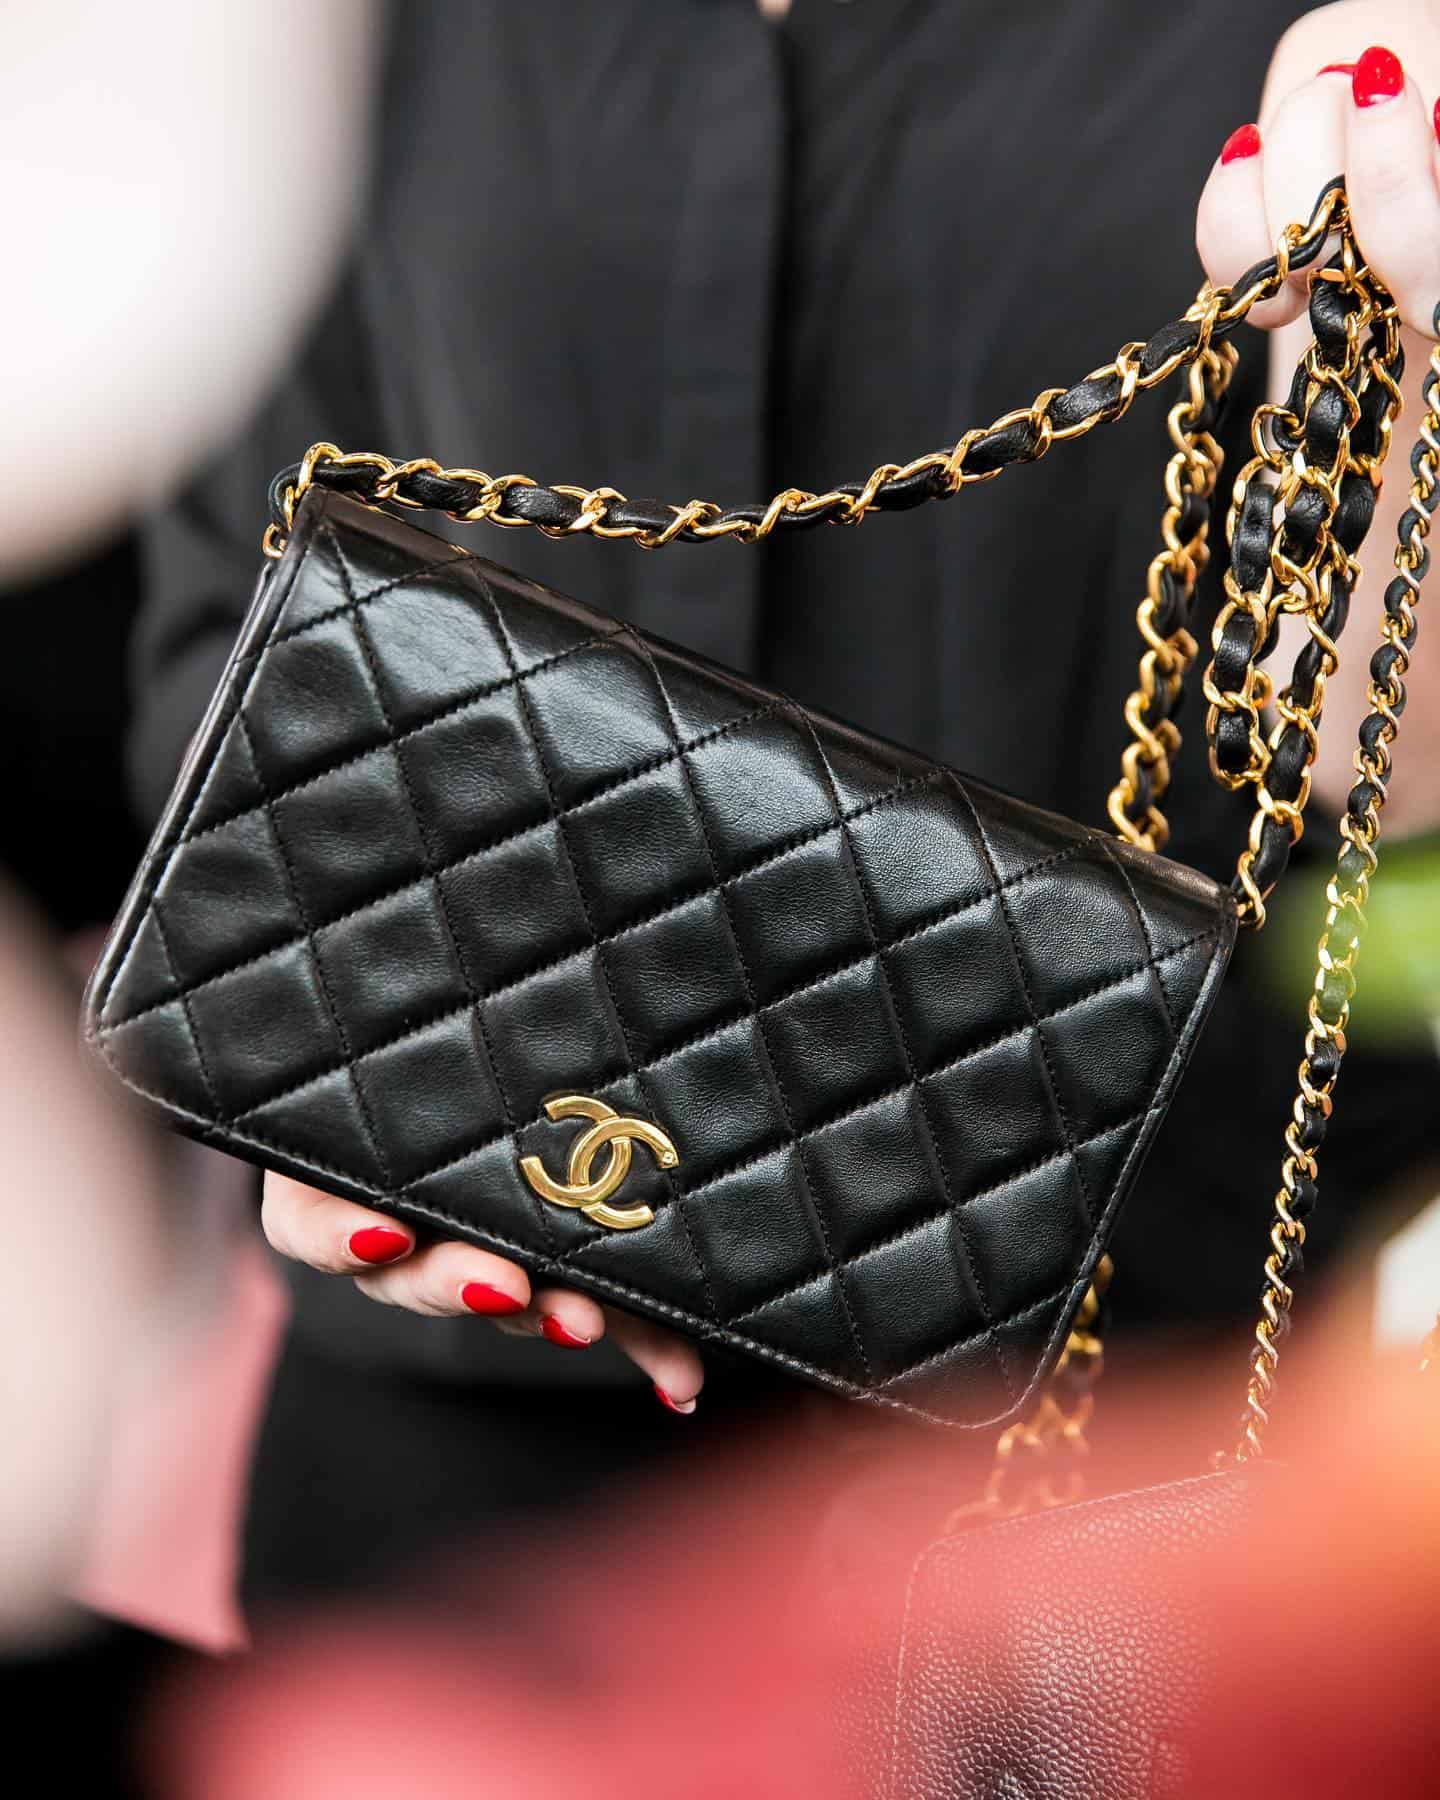 Reasons to buy a vintage Chanel bag